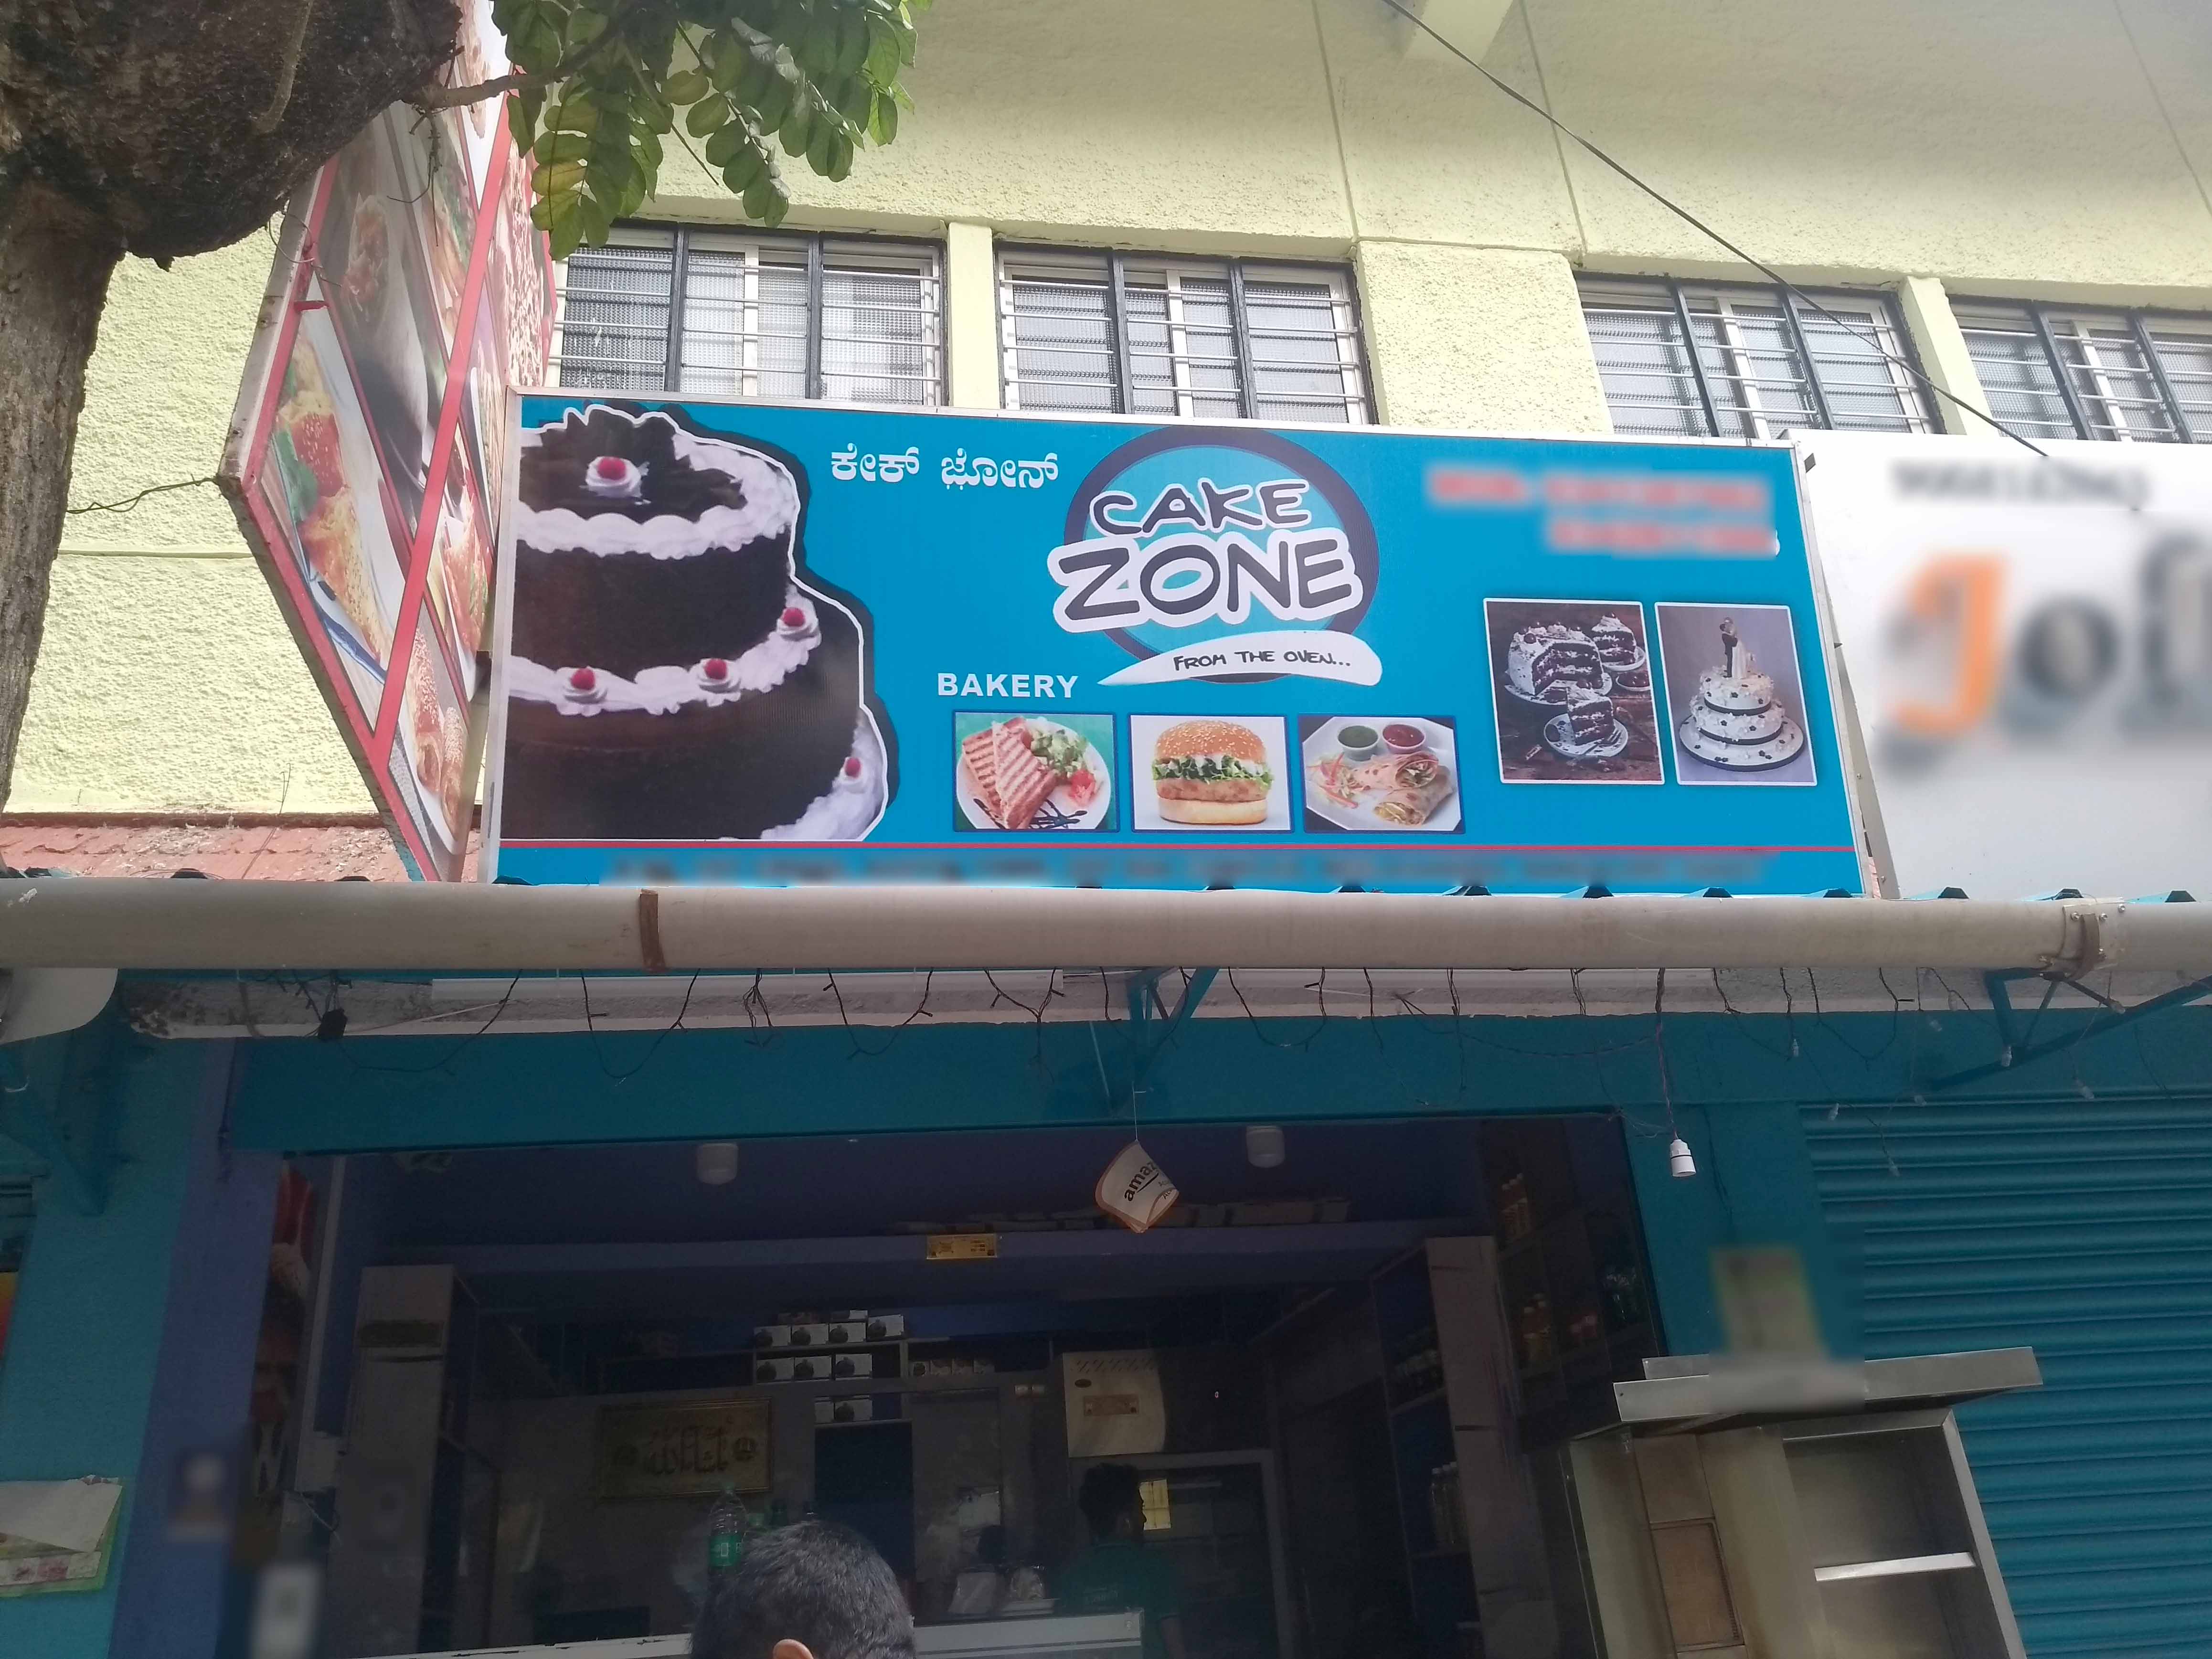 Cakezone in Wakad,Pune - Best Cake Shops in Pune - Justdial